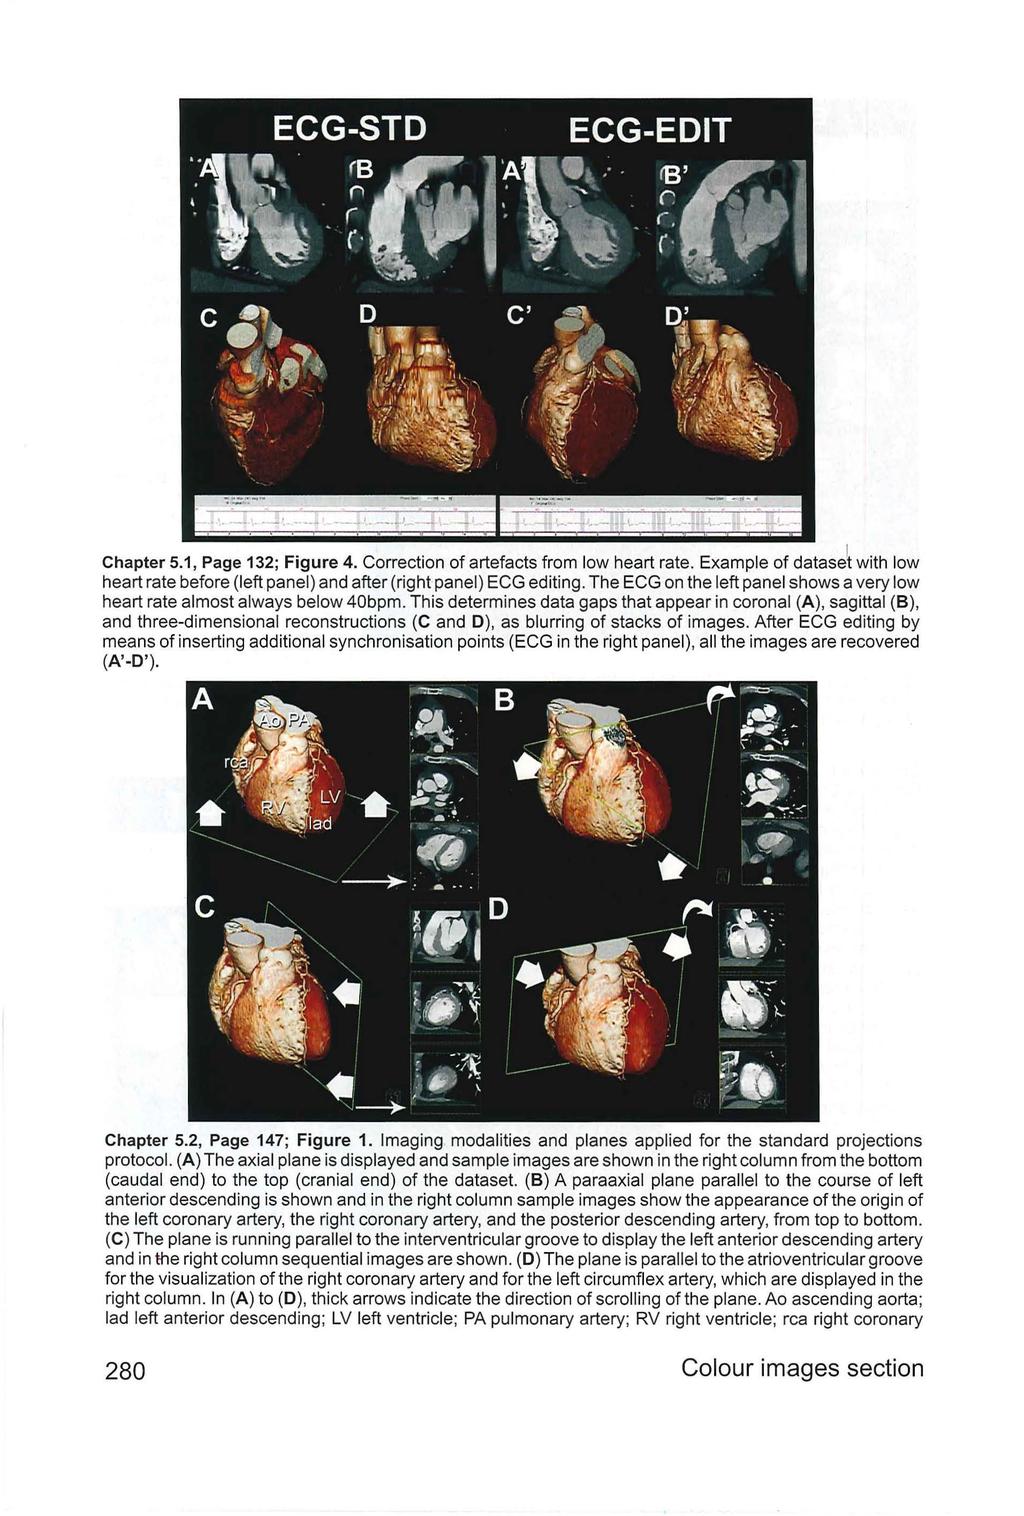 Chapter 5.1, Page 132; Figure 4. Correction of artefacts from low heart rate. Example of datase~ with low heart rate before (left panel) and after (right panel) ECG editing.